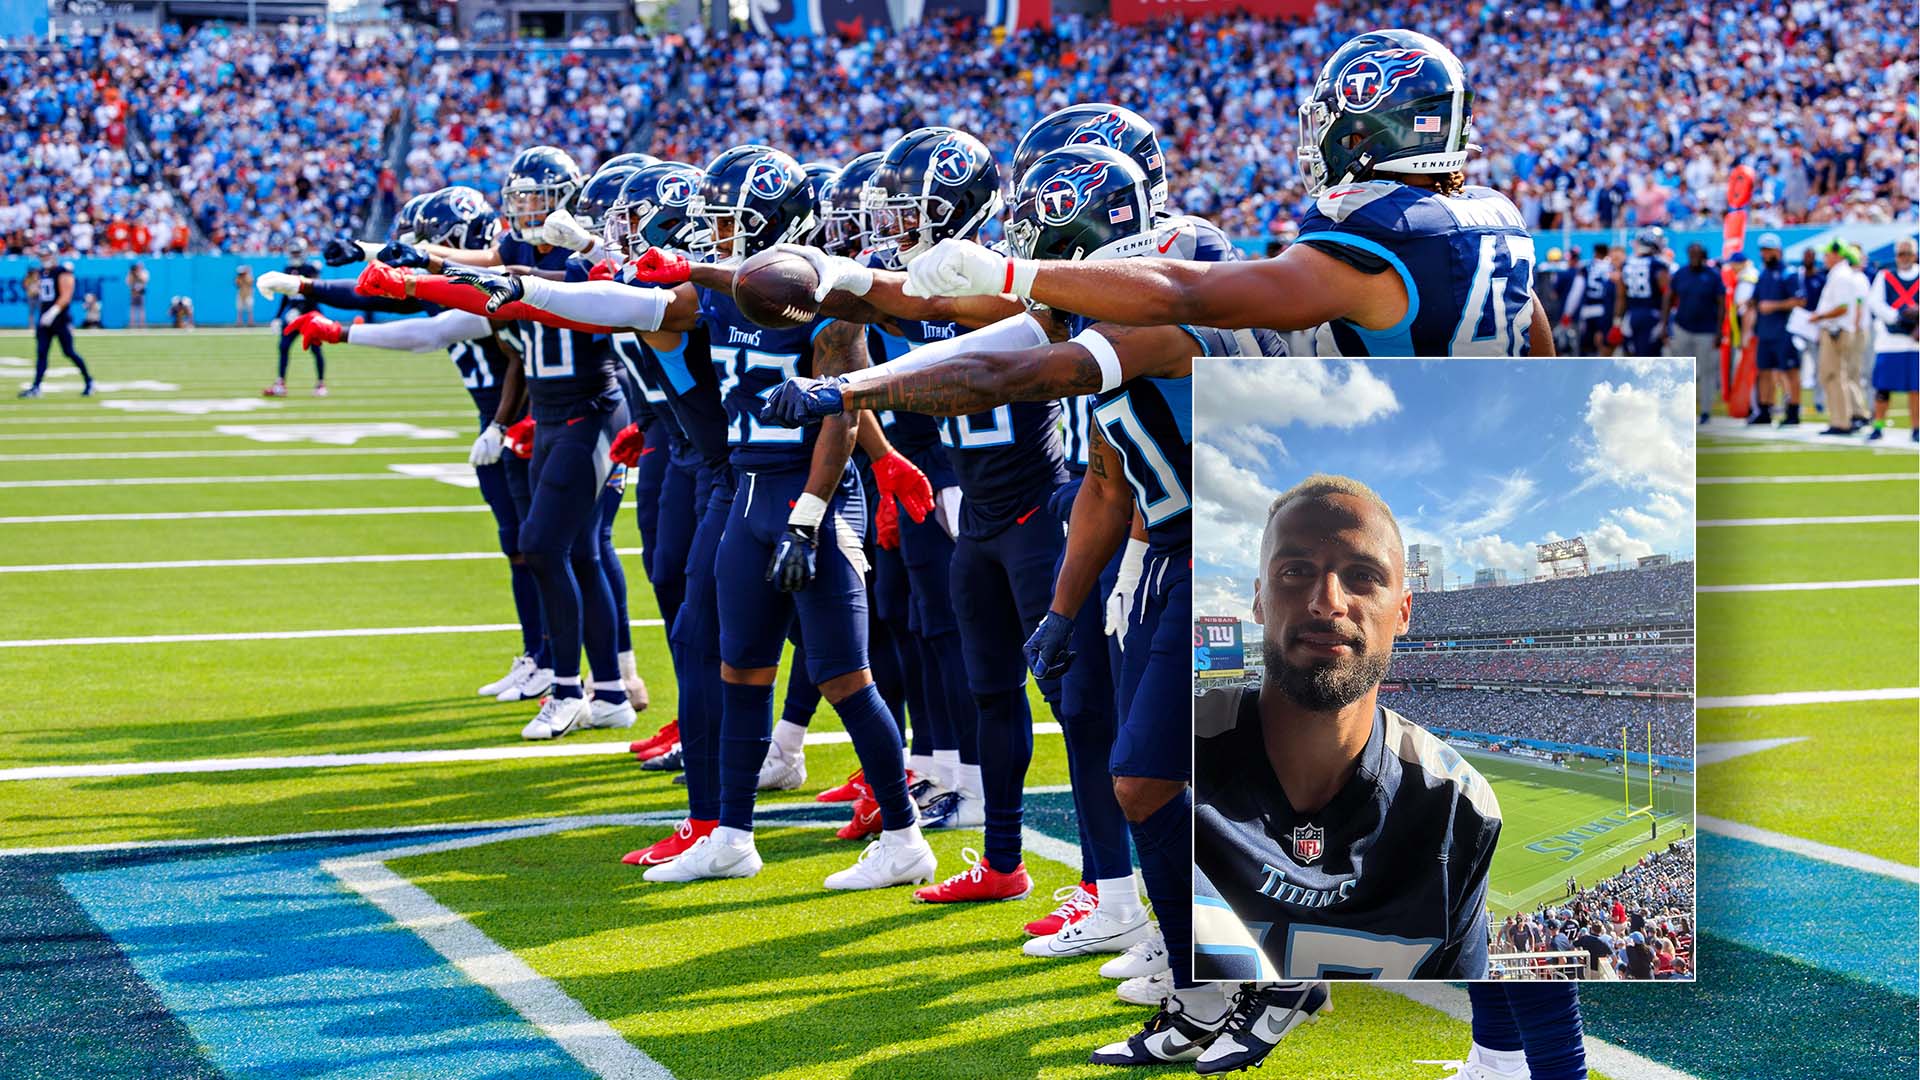 He follows the Tennessee Titans, Nashville’s American football team. In fact, he’s been seen on several occasions at the Nissan Stadium wearing Amani Hooker’s jersey.